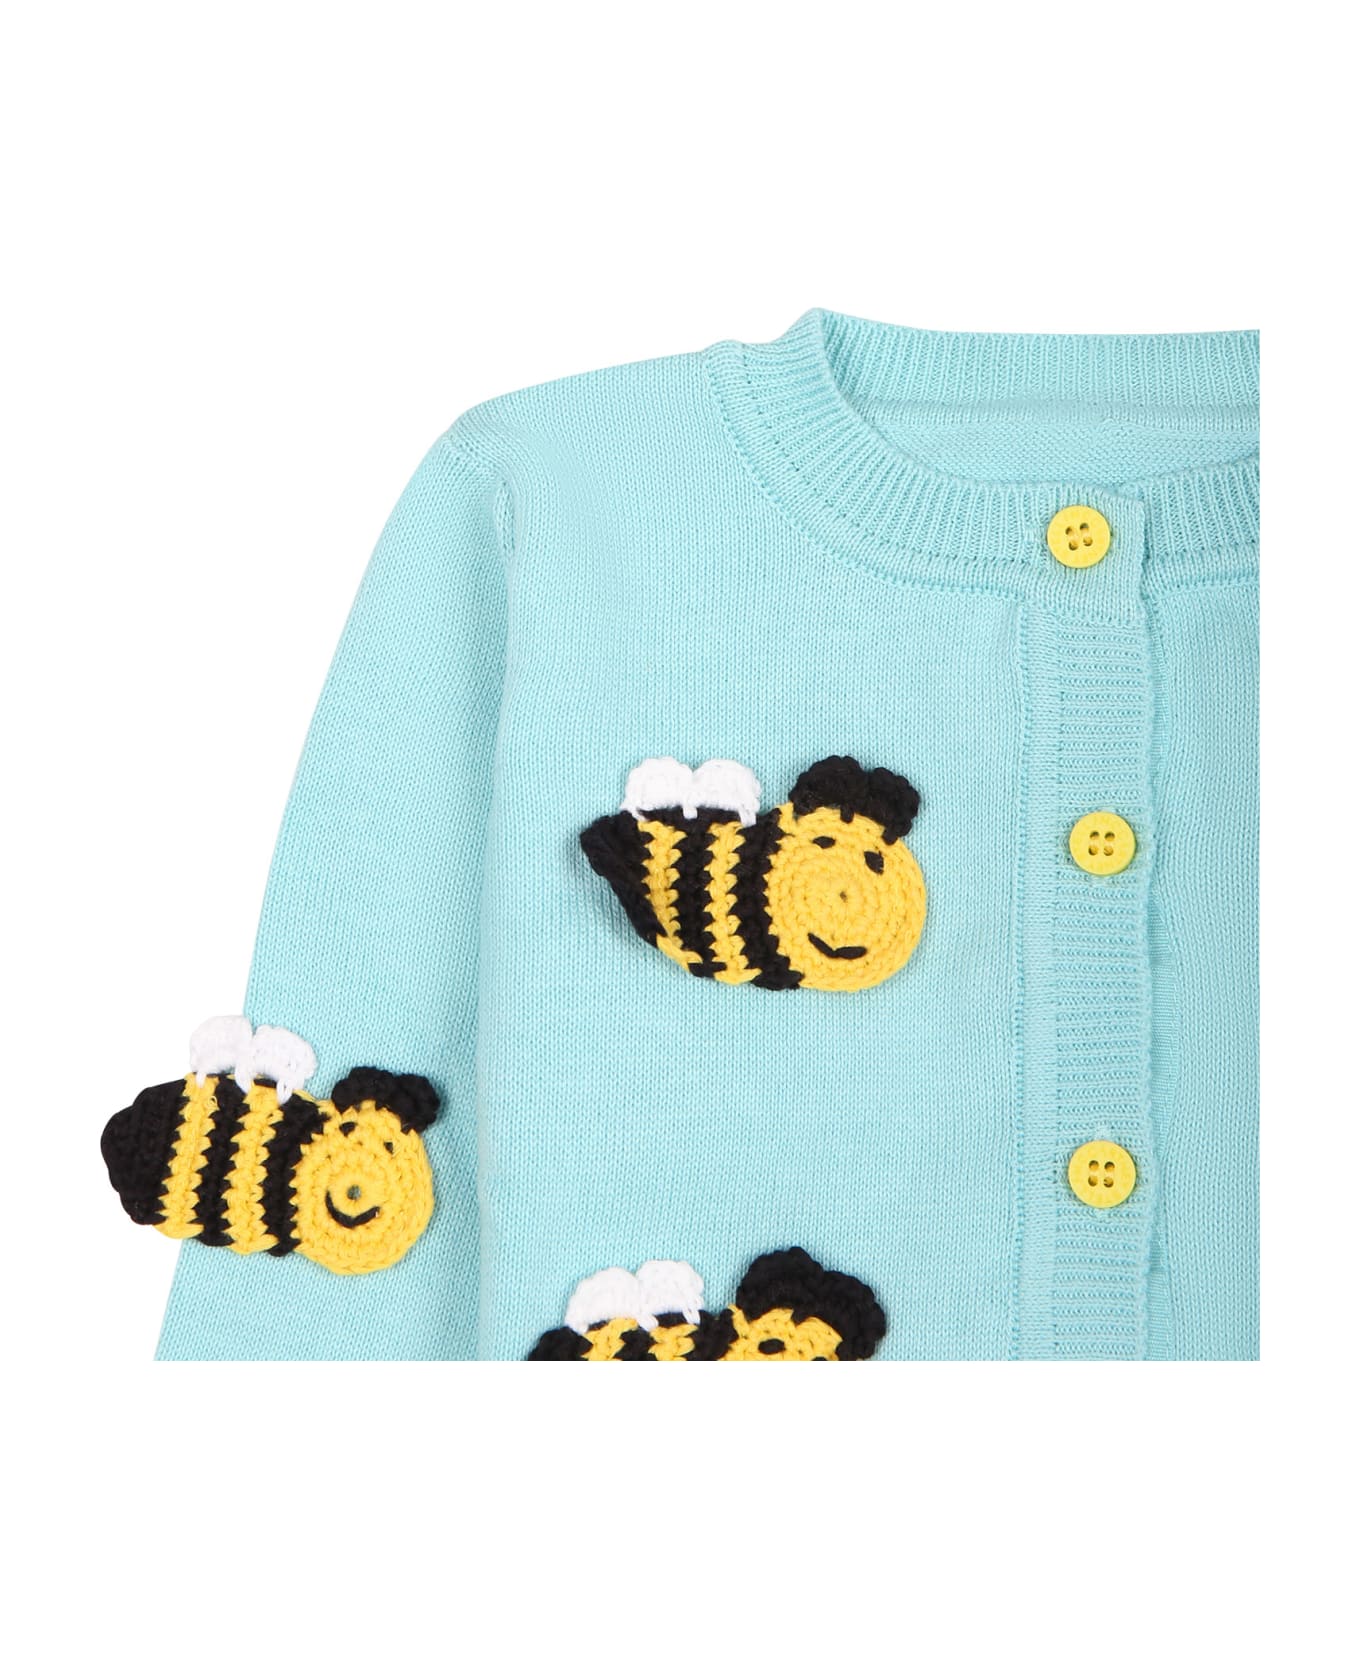 Stella McCartney Kids Light Blue Cardigan For Baby Girl With Bees - Light blue